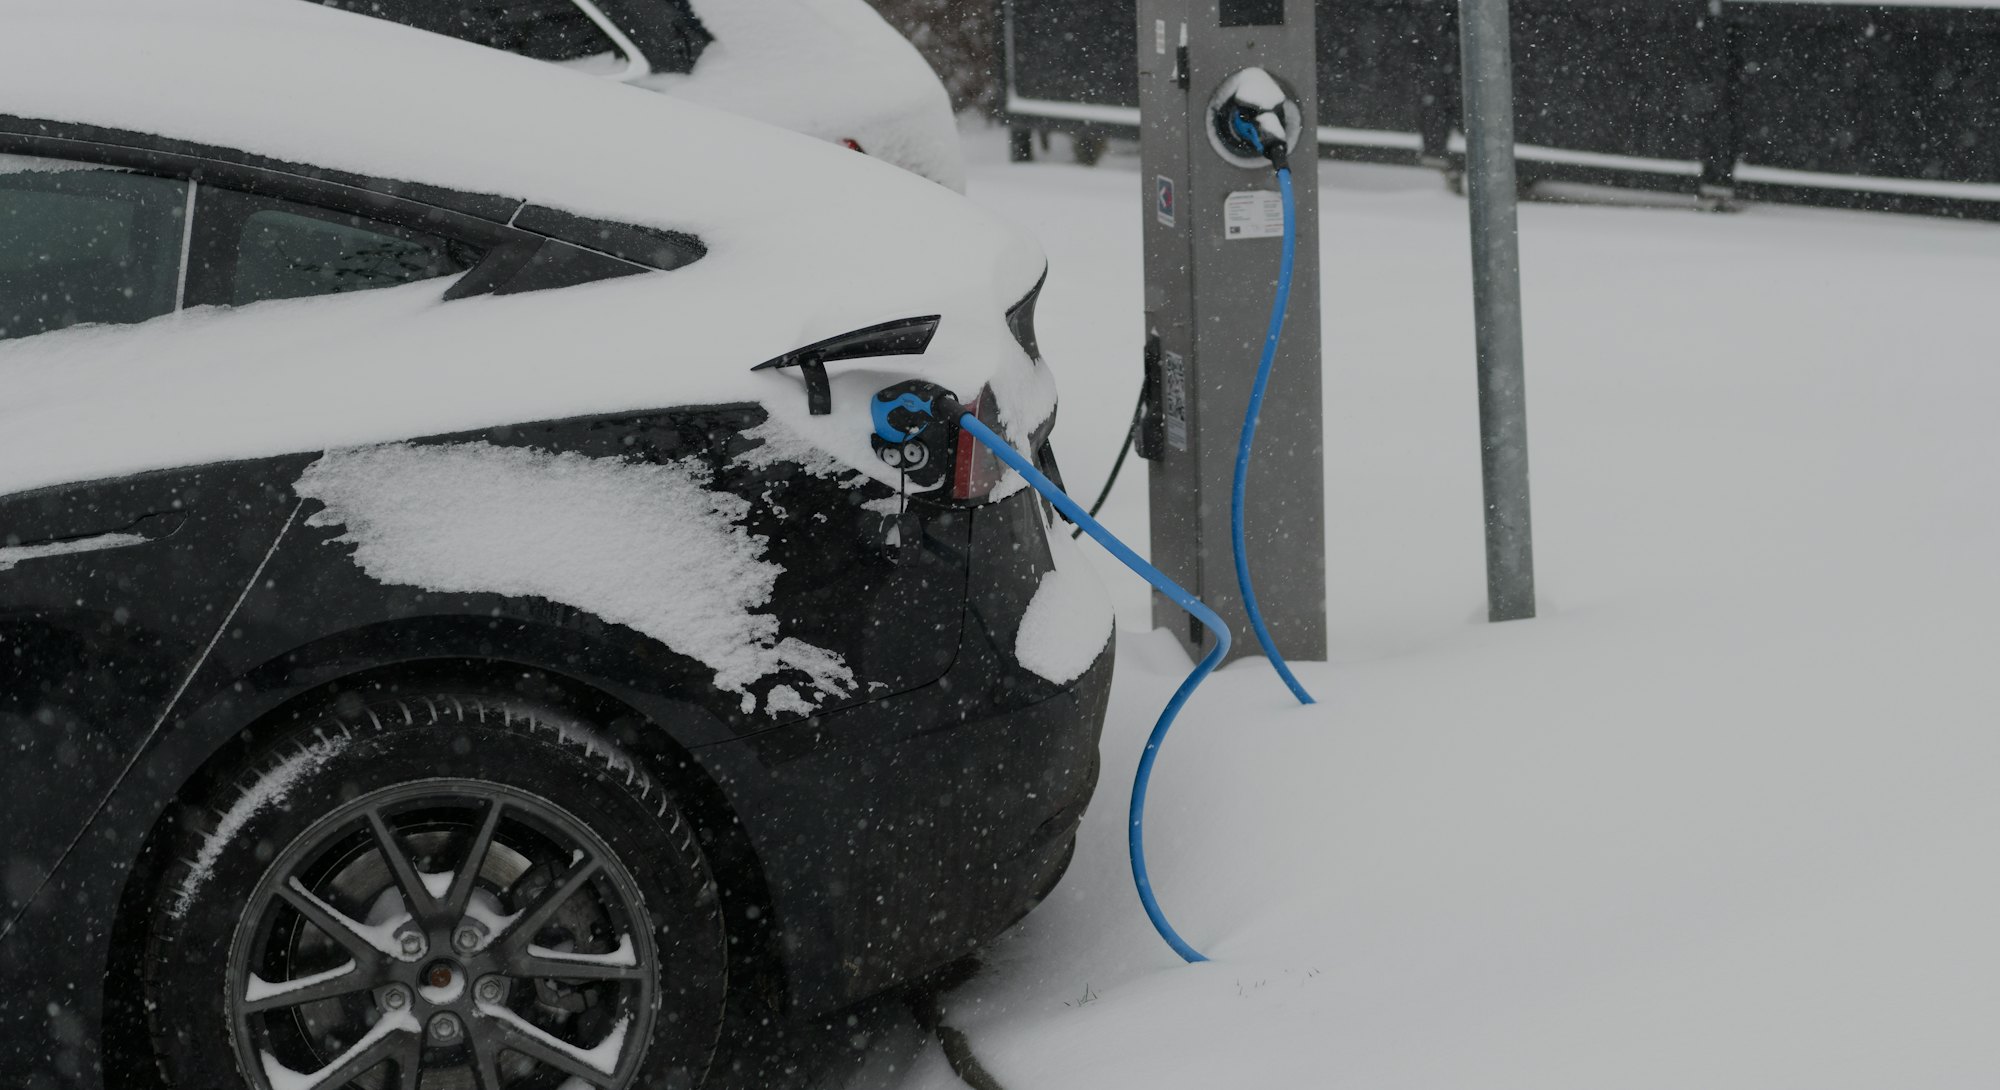 Electric cars charging at an electric vehicle charging station during a cold winter day with fresh s...